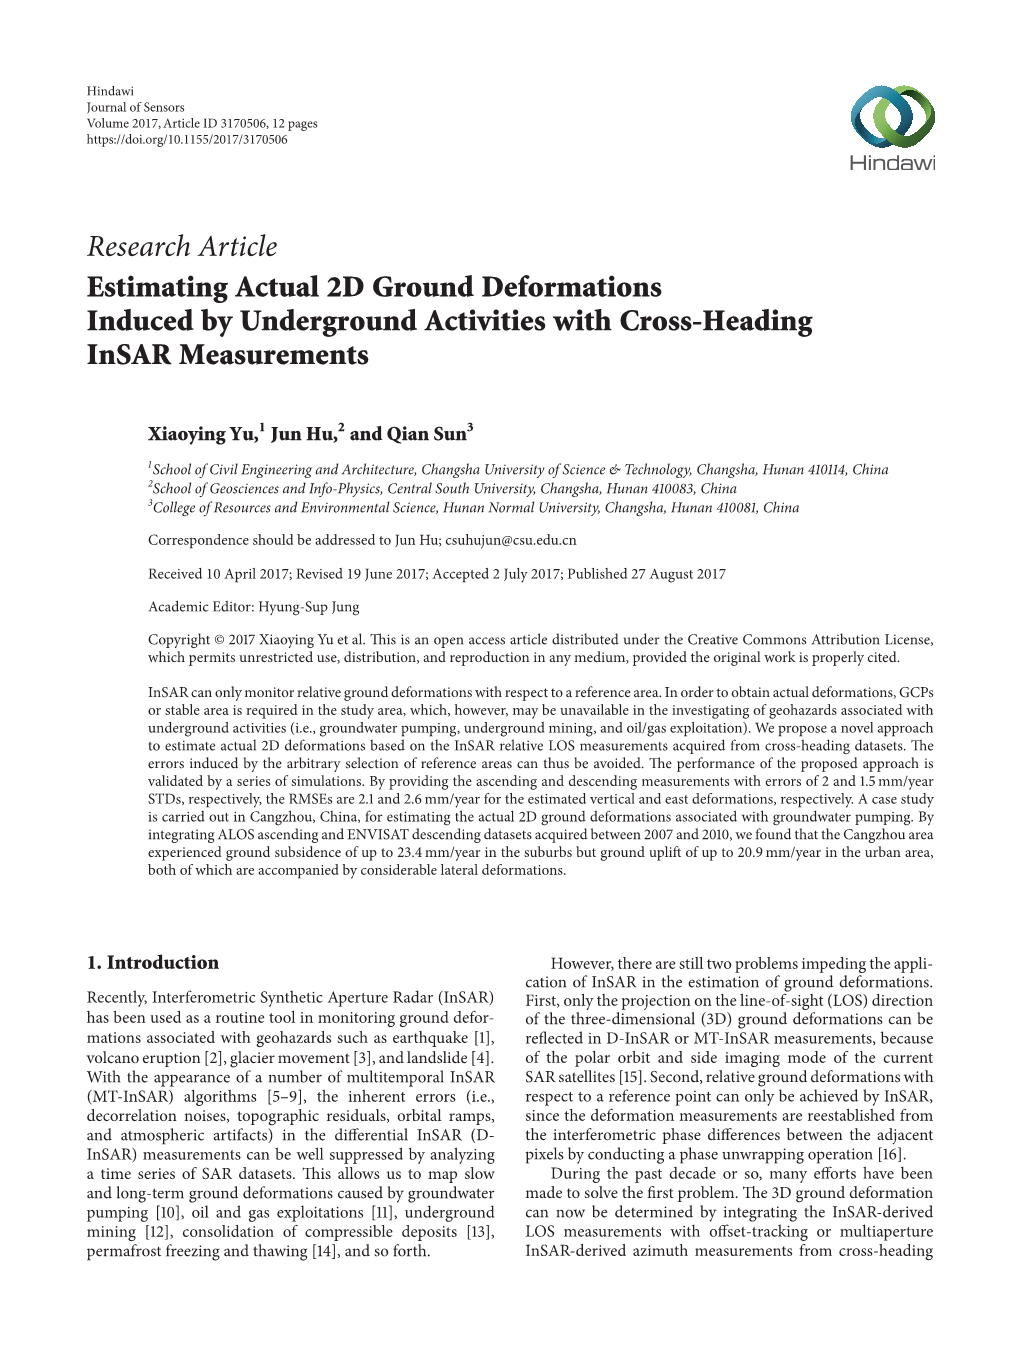 Estimating Actual 2D Ground Deformations Induced by Underground Activities with Cross-Heading Insar Measurements